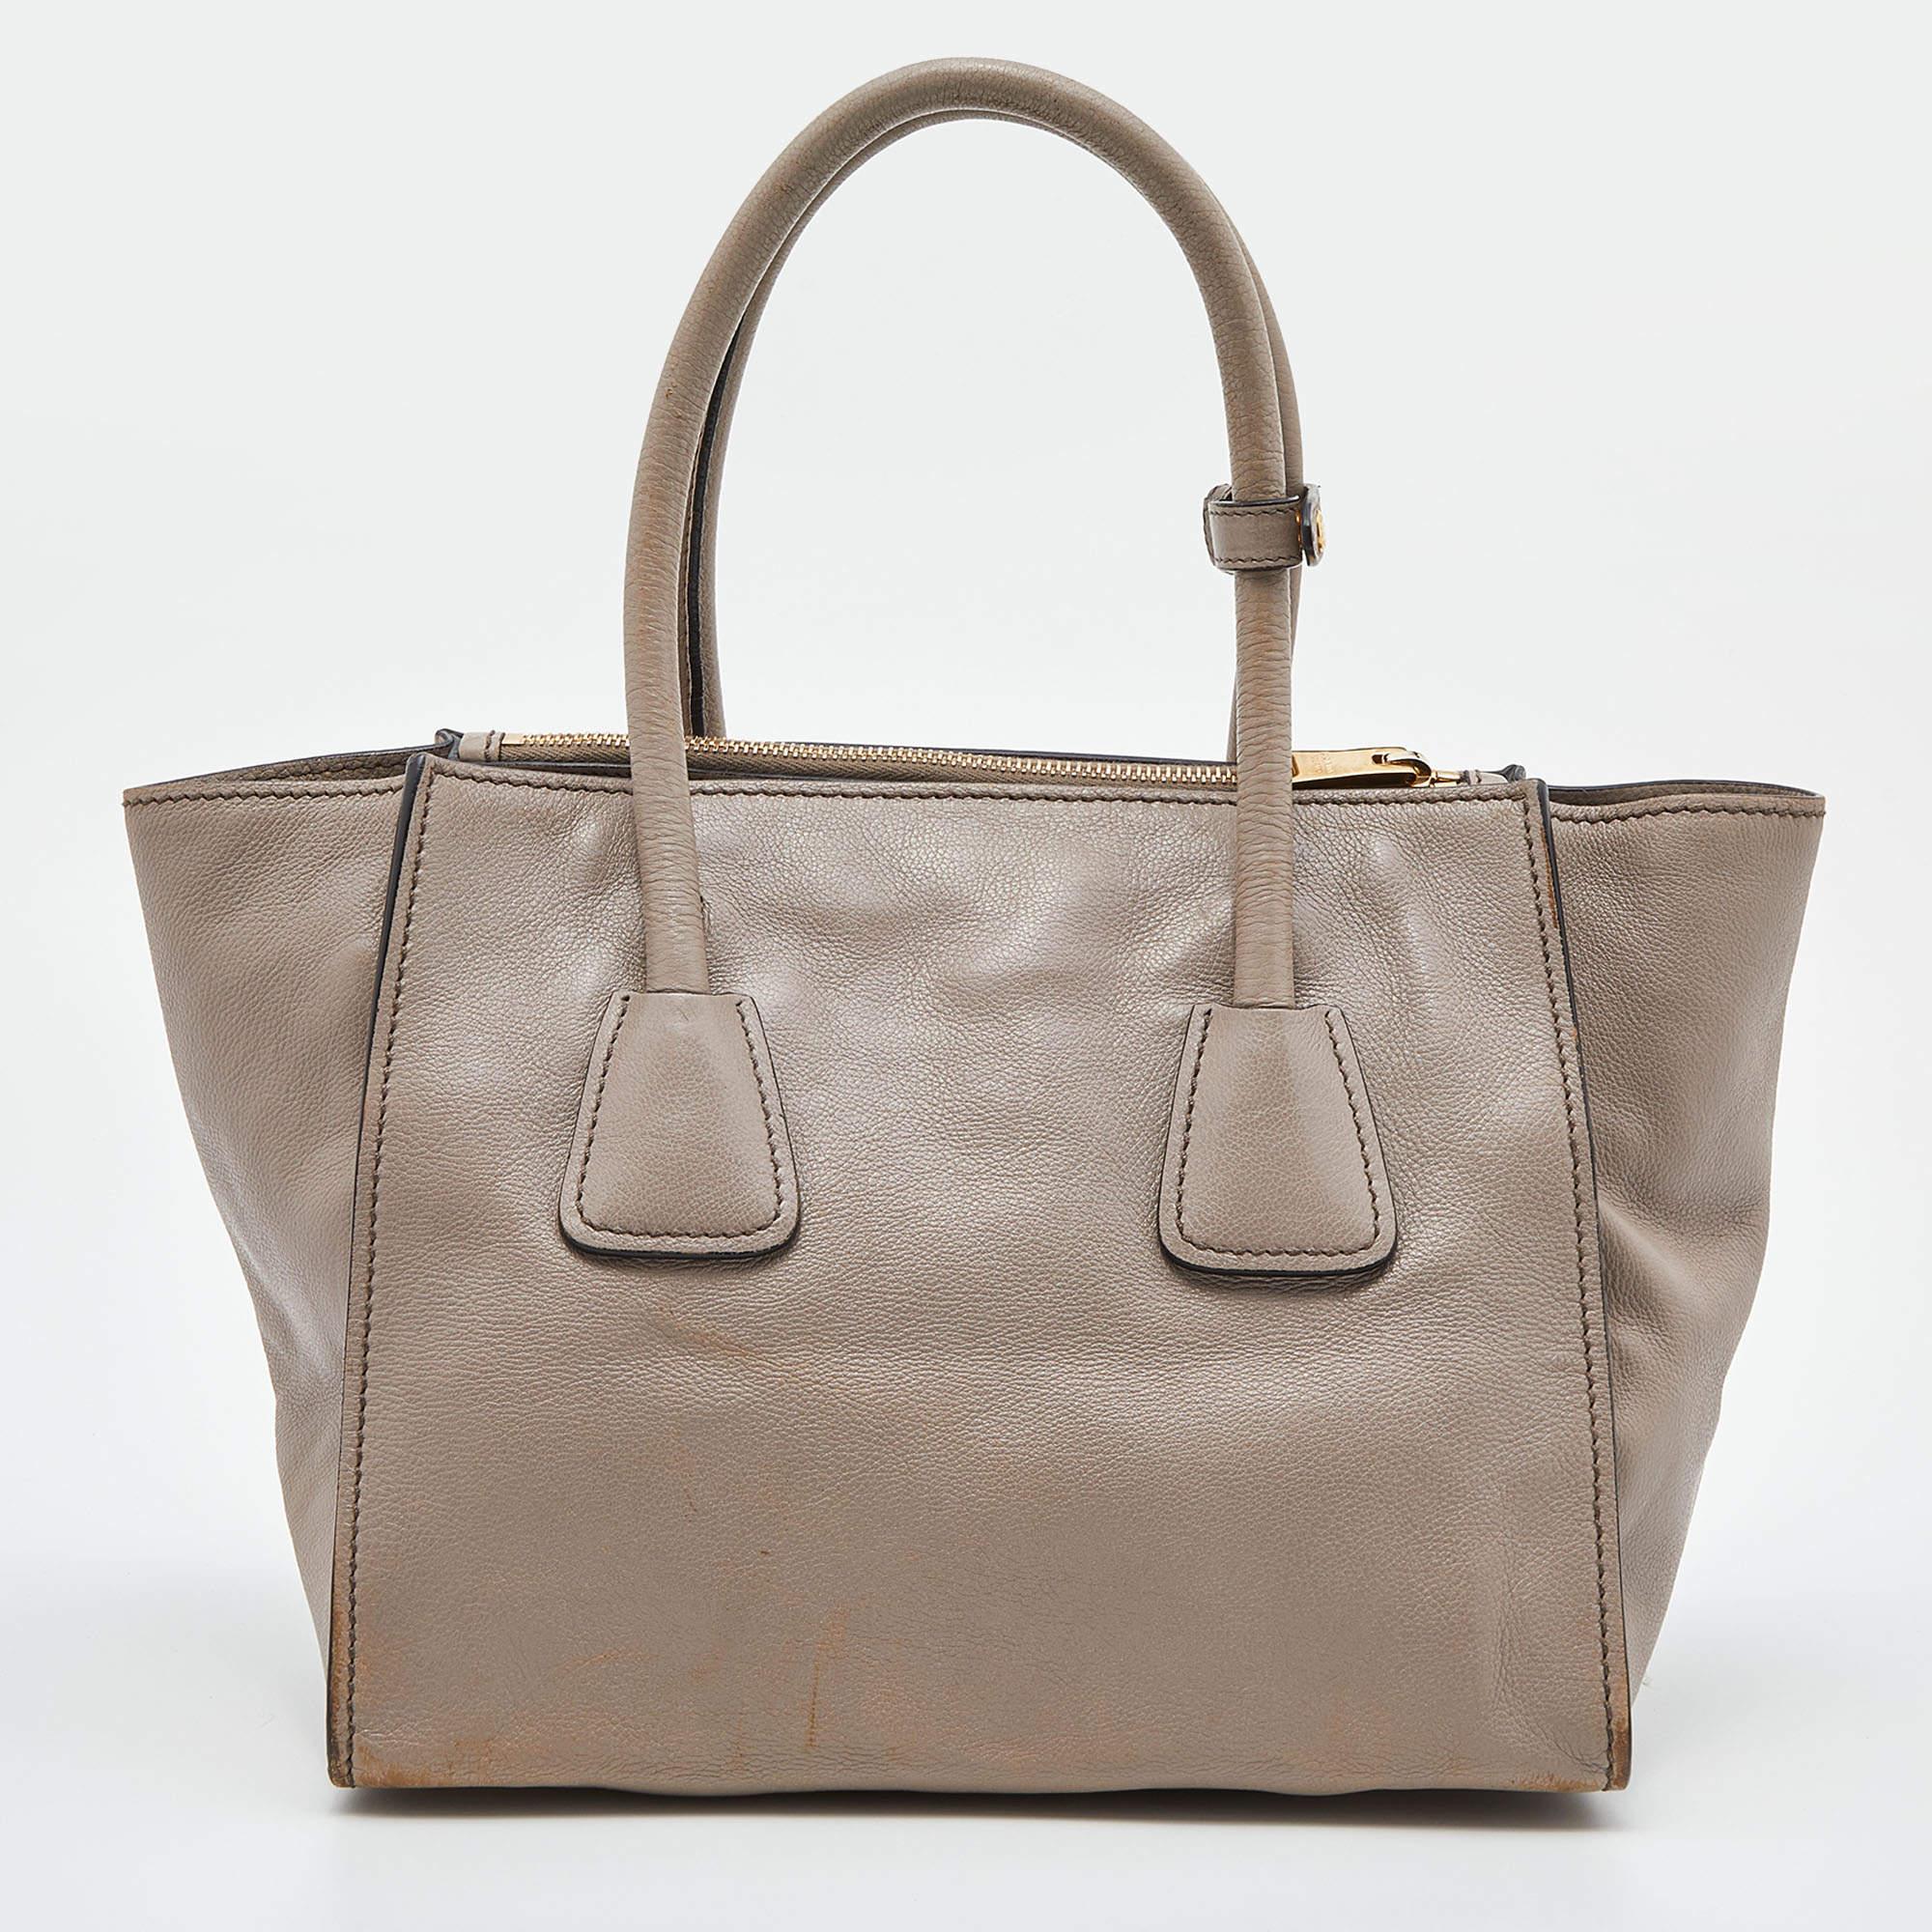 Add some effortless style and luxury to your everyday looks with this stunning Prada tote. Crafted in leather, this bag can store all that you need throughout the day or for work. The bag is equipped with the brand logo on the front, dual handles,